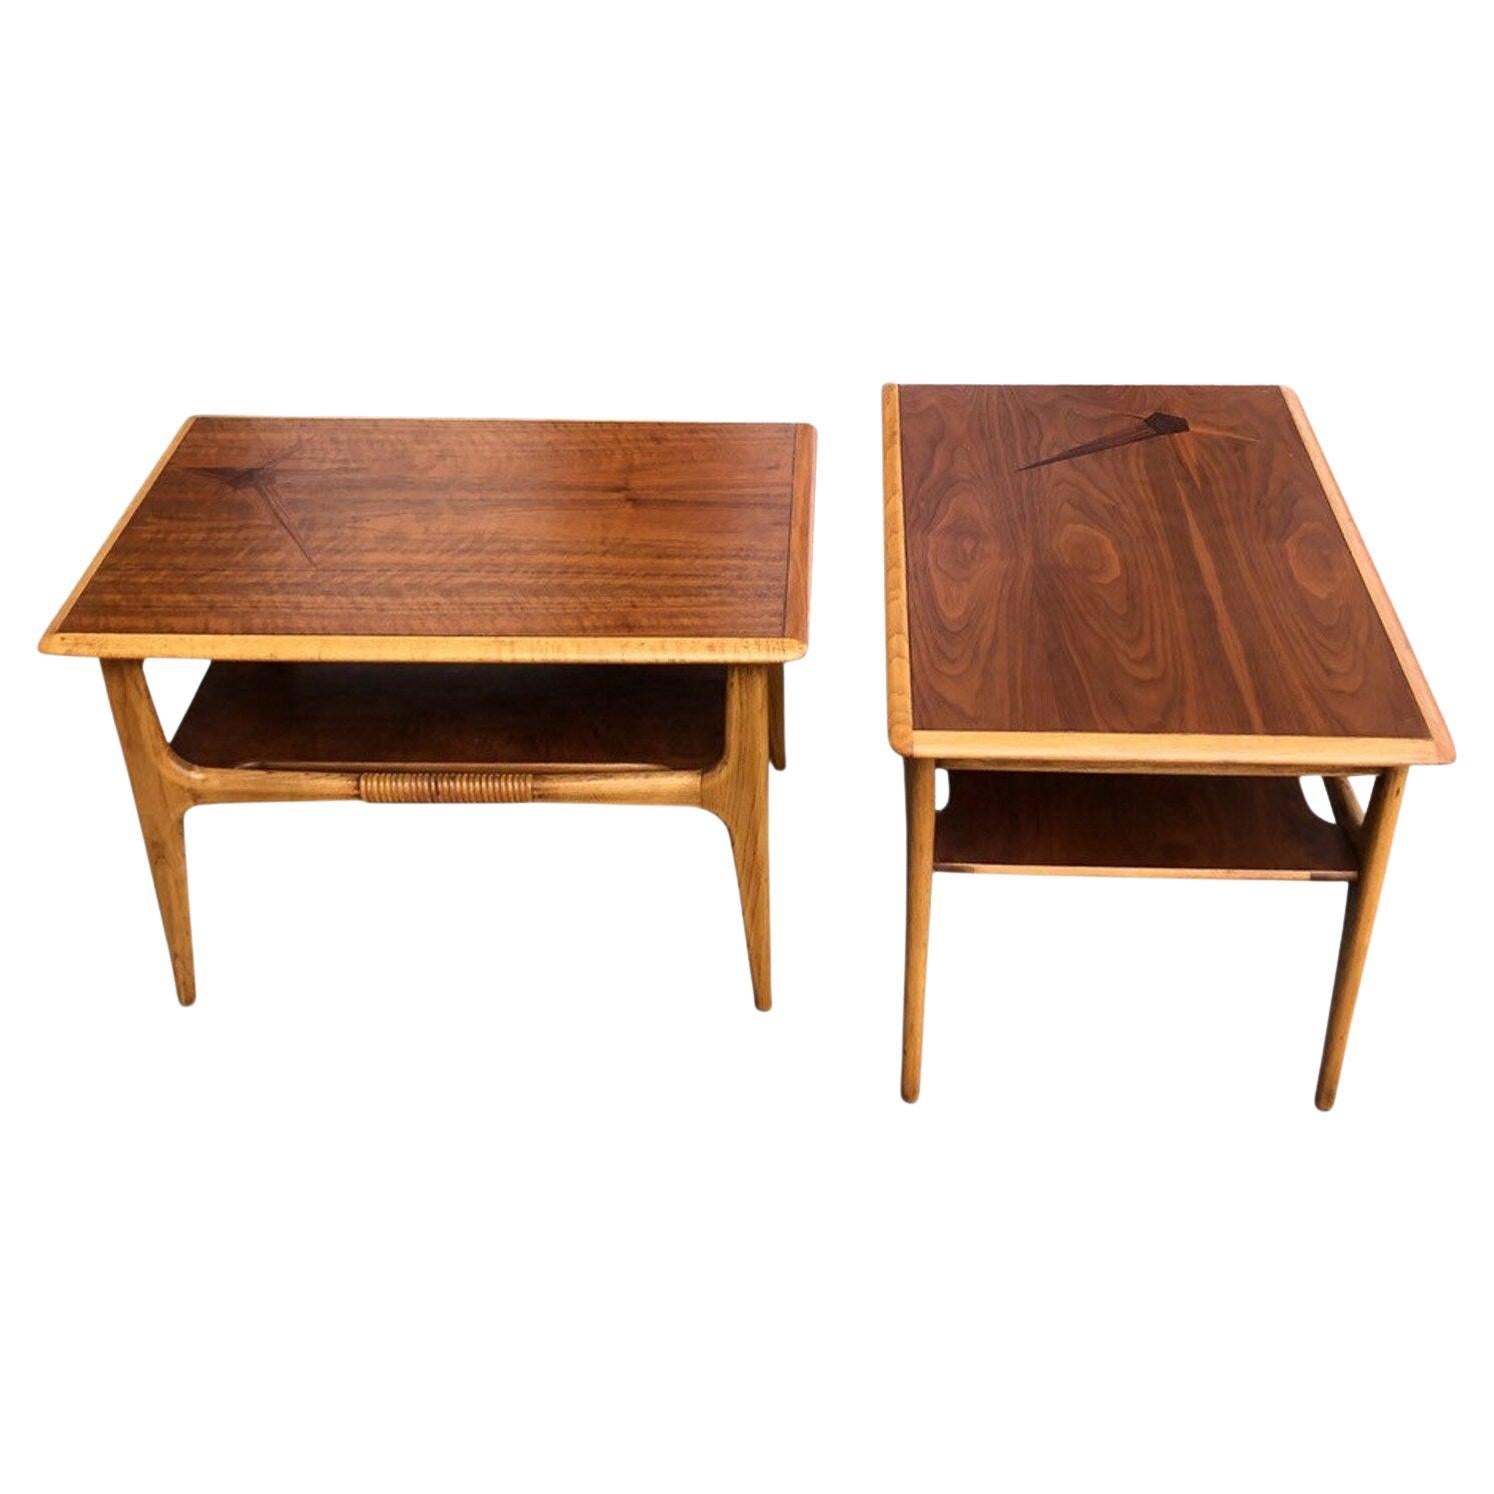 Pair of Mid-Century Modern Two-Toned Side End Tables with Shelf